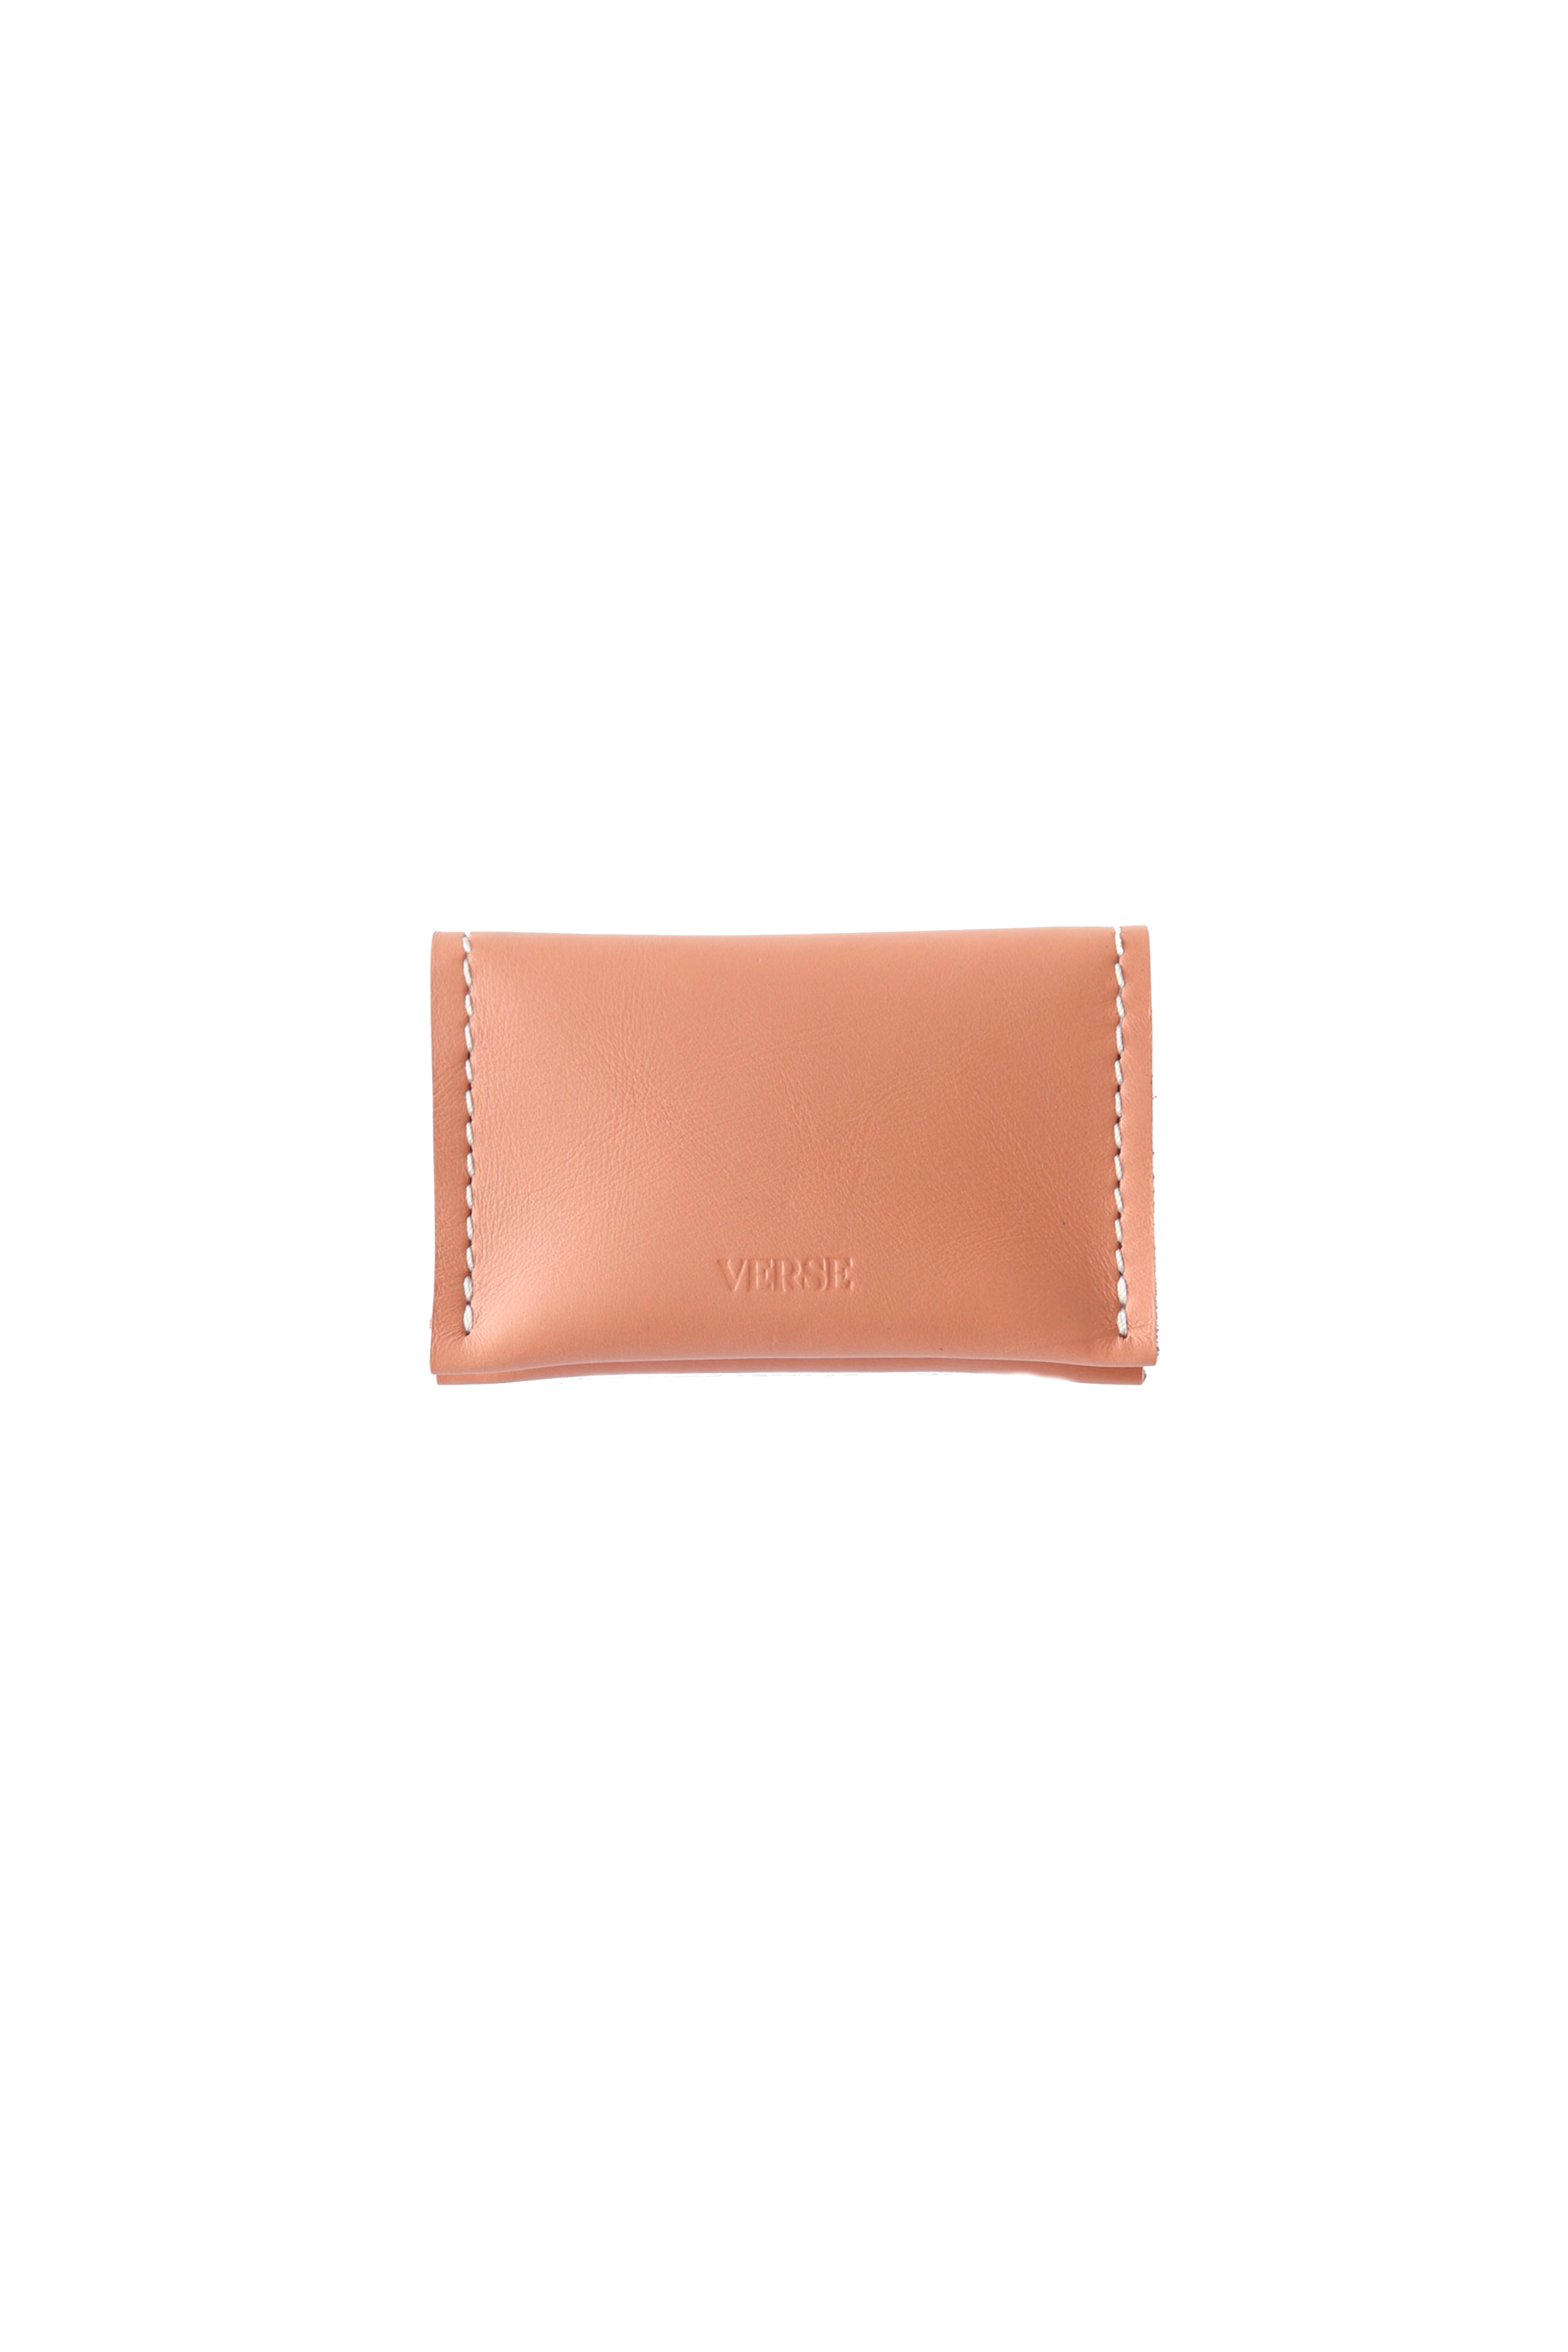 Small Fortune Leather Wallet in Protea Pink